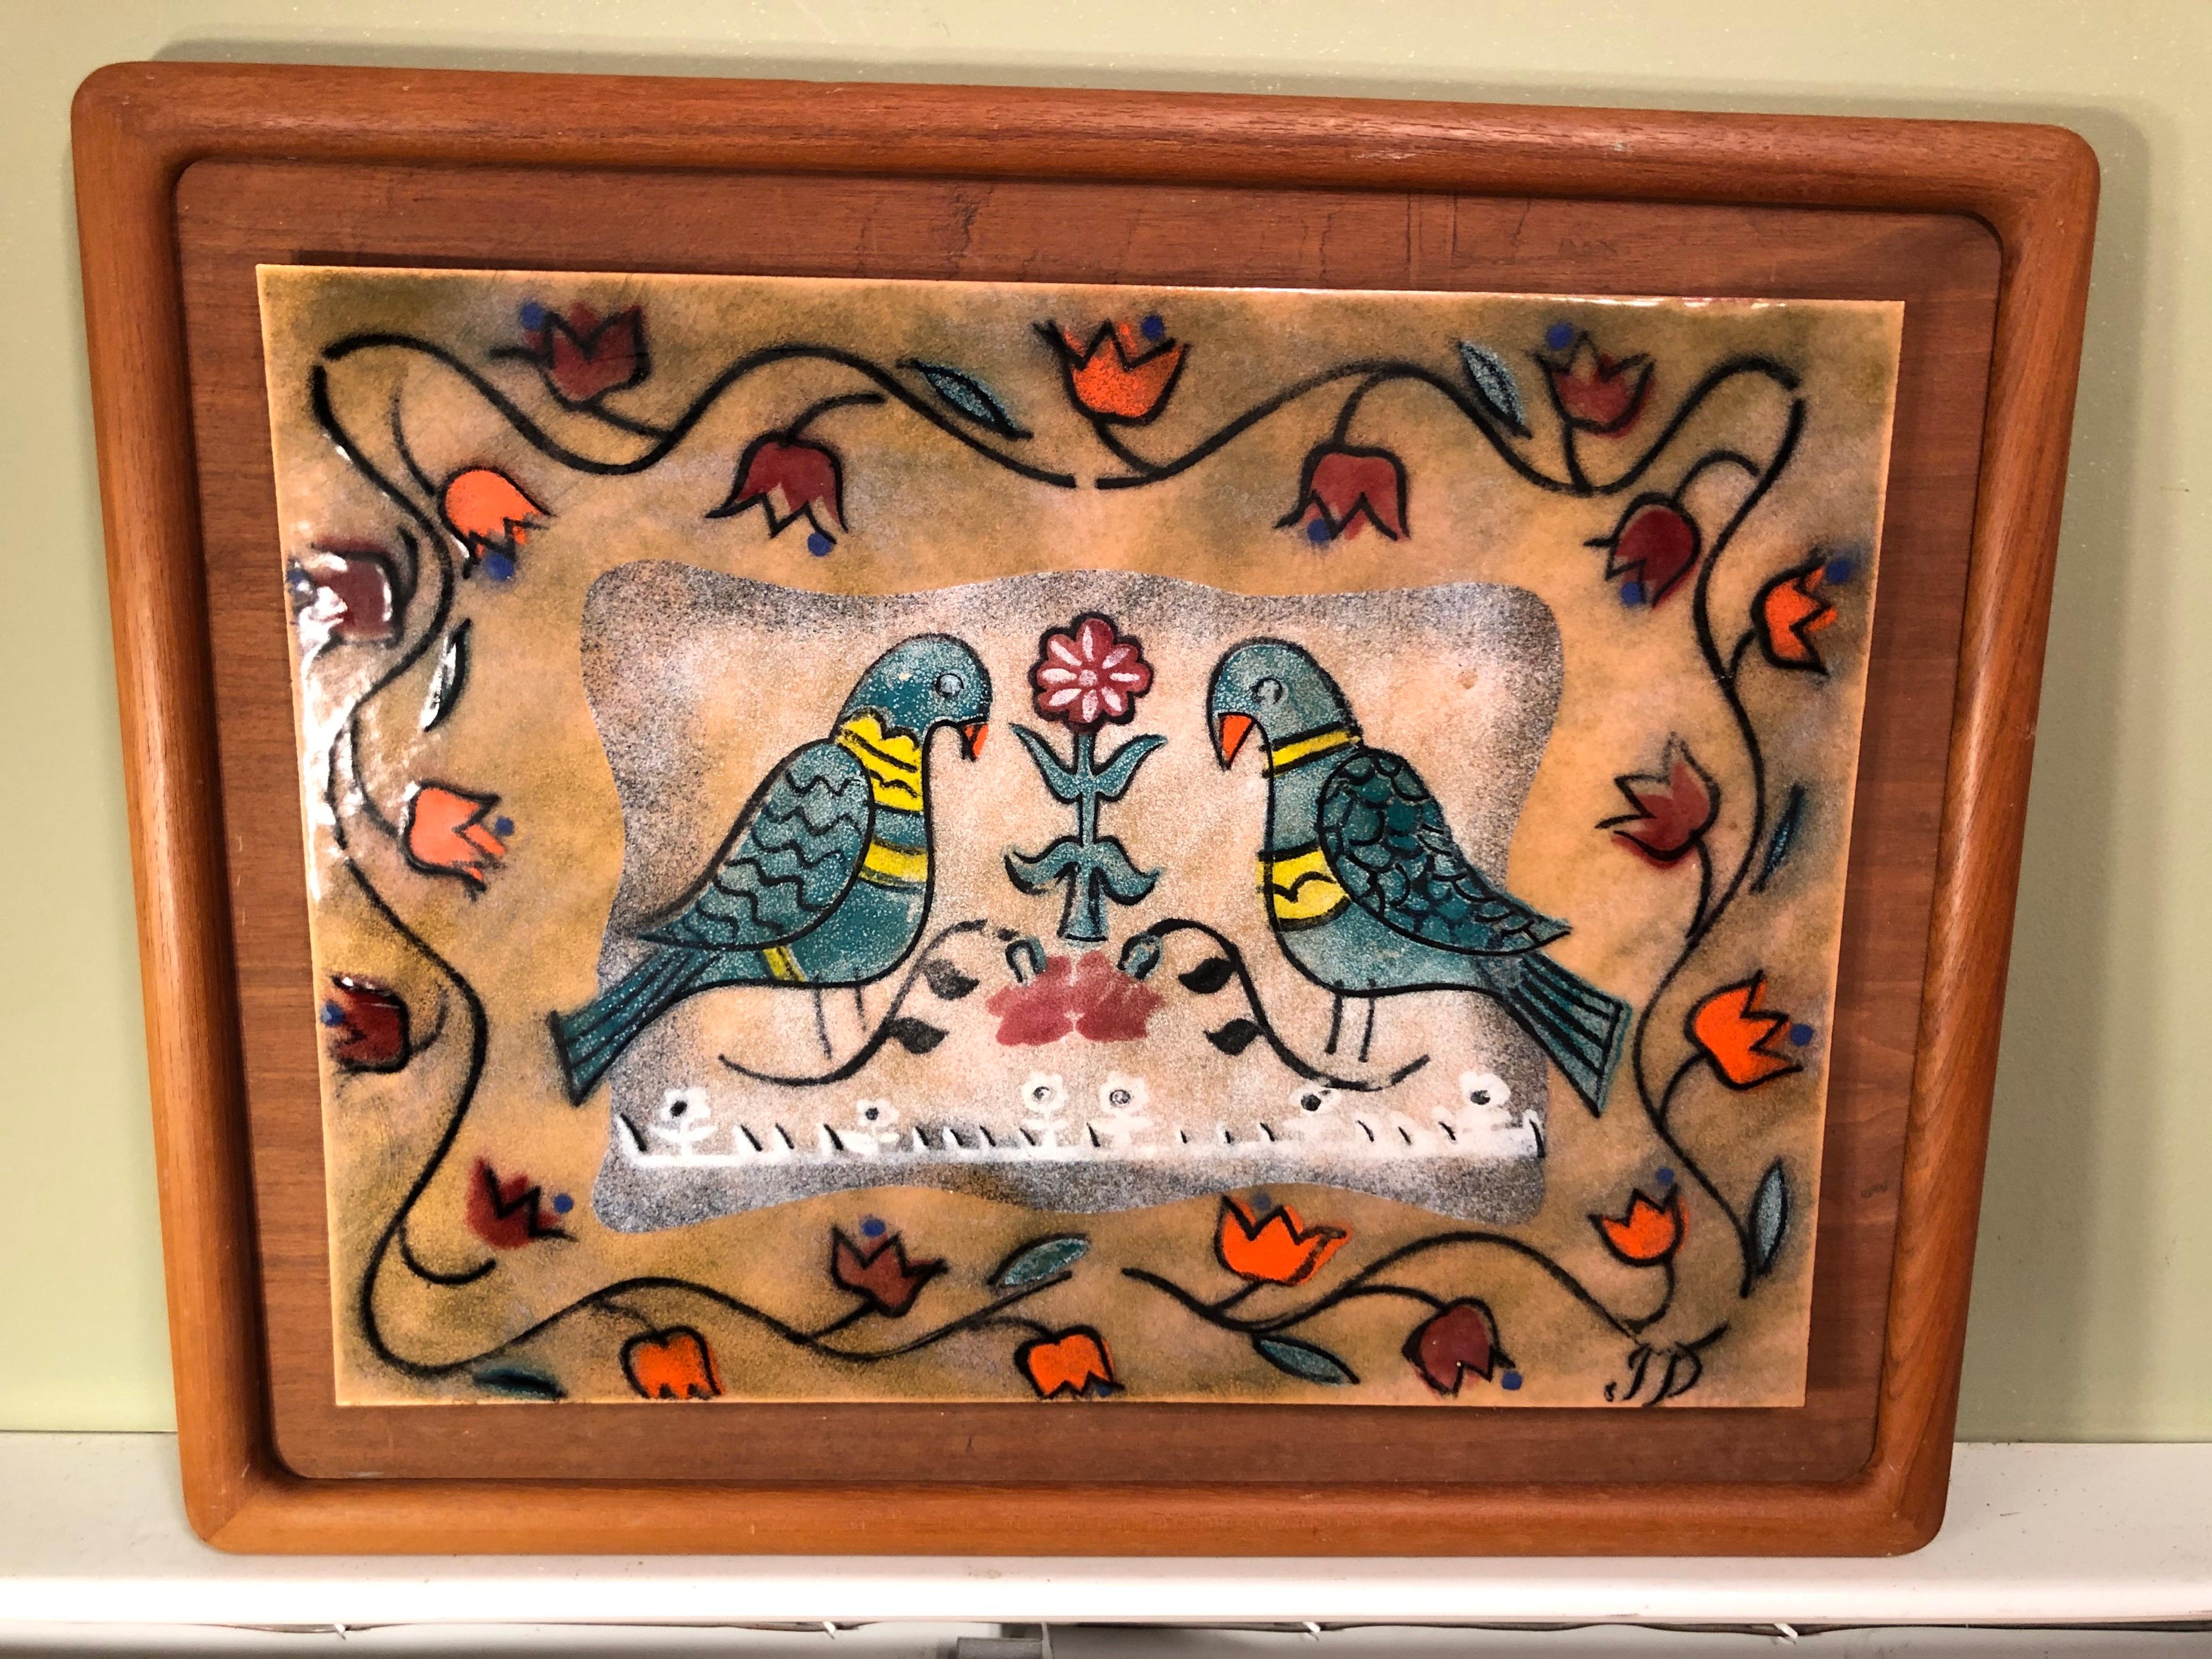 Mid-Century Modern Enamel Artwork by Judith Danner. Amazing piece of work by a very talented artist. Signed JD (Judith Daner). Copper enamel plaque mounted on board in a teak frame with rounded edges.
Judith Daner is currently 80 years old and